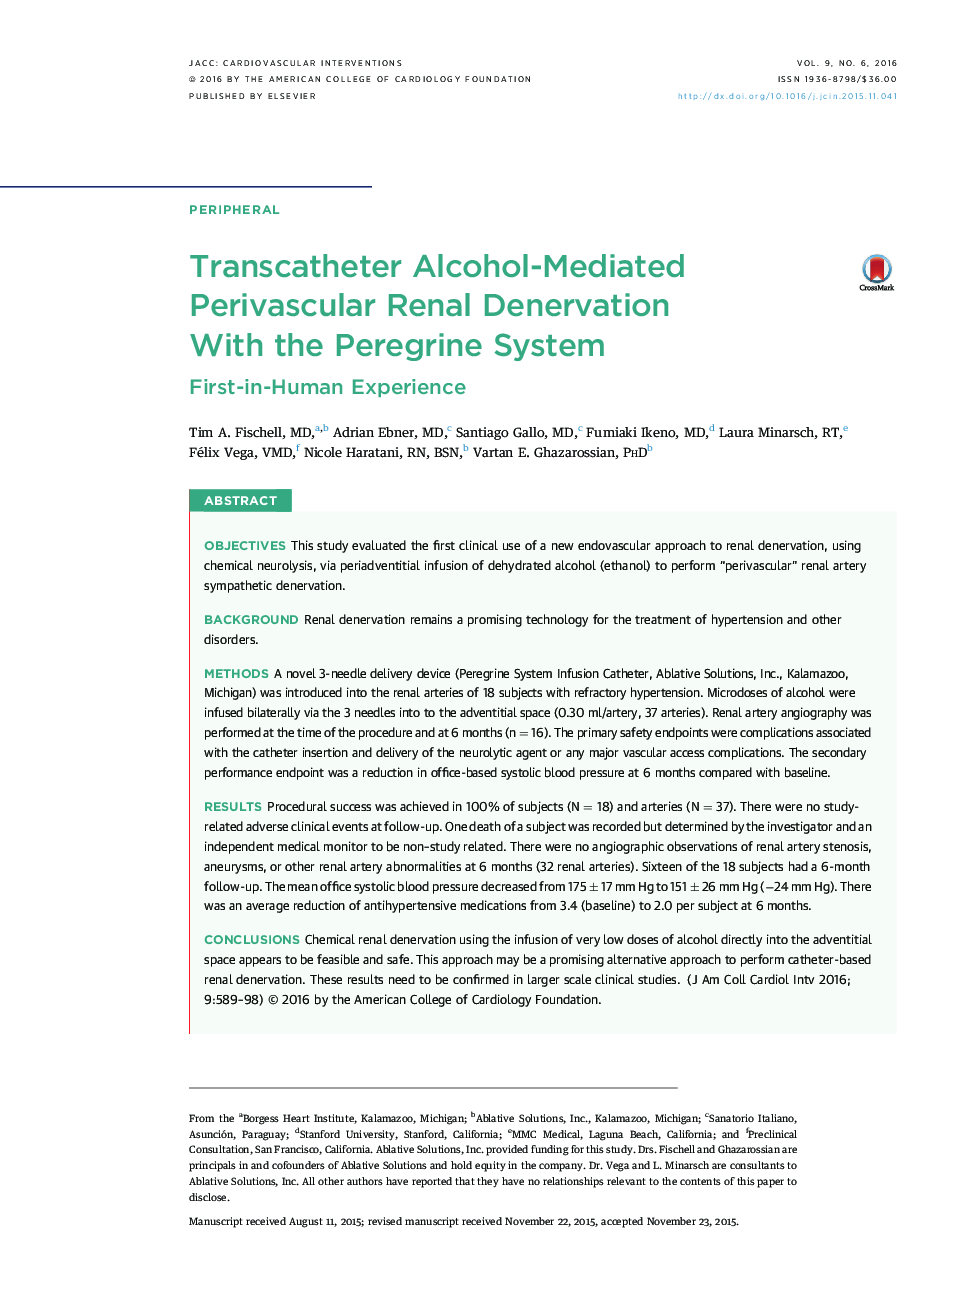 Transcatheter Alcohol-Mediated Perivascular Renal Denervation With the Peregrine System : First-in-Human Experience